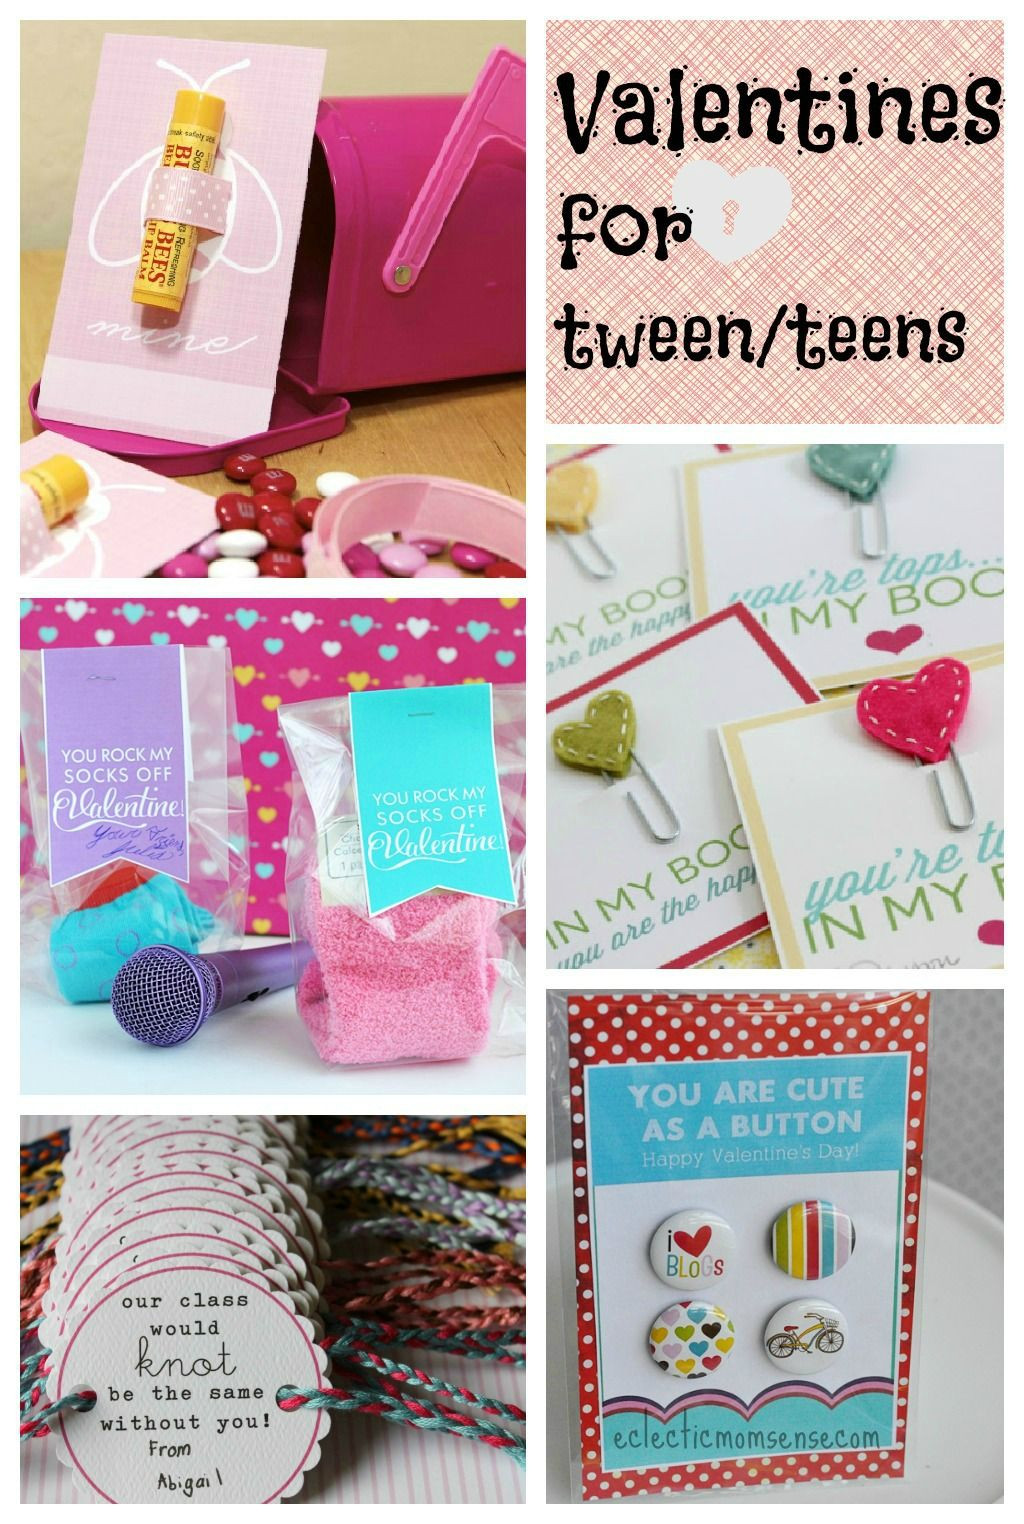 Valentines Gift Ideas For Young Daughter
 Valentines Ideas for Tween Teens via Kelly Eclectic